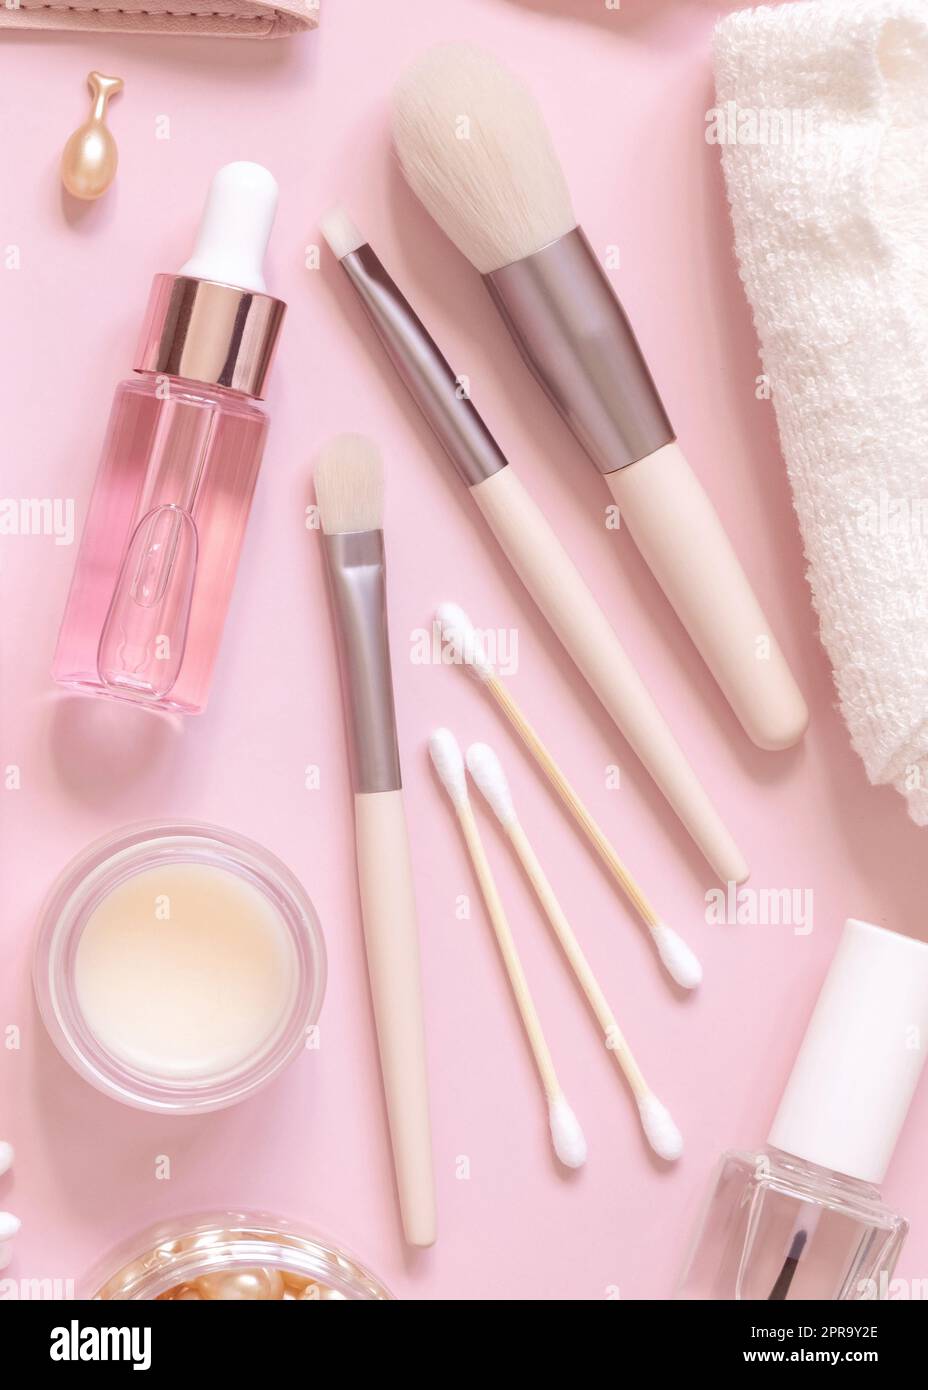 Skin care products and make up brushes on light pink, top view Stock Photo